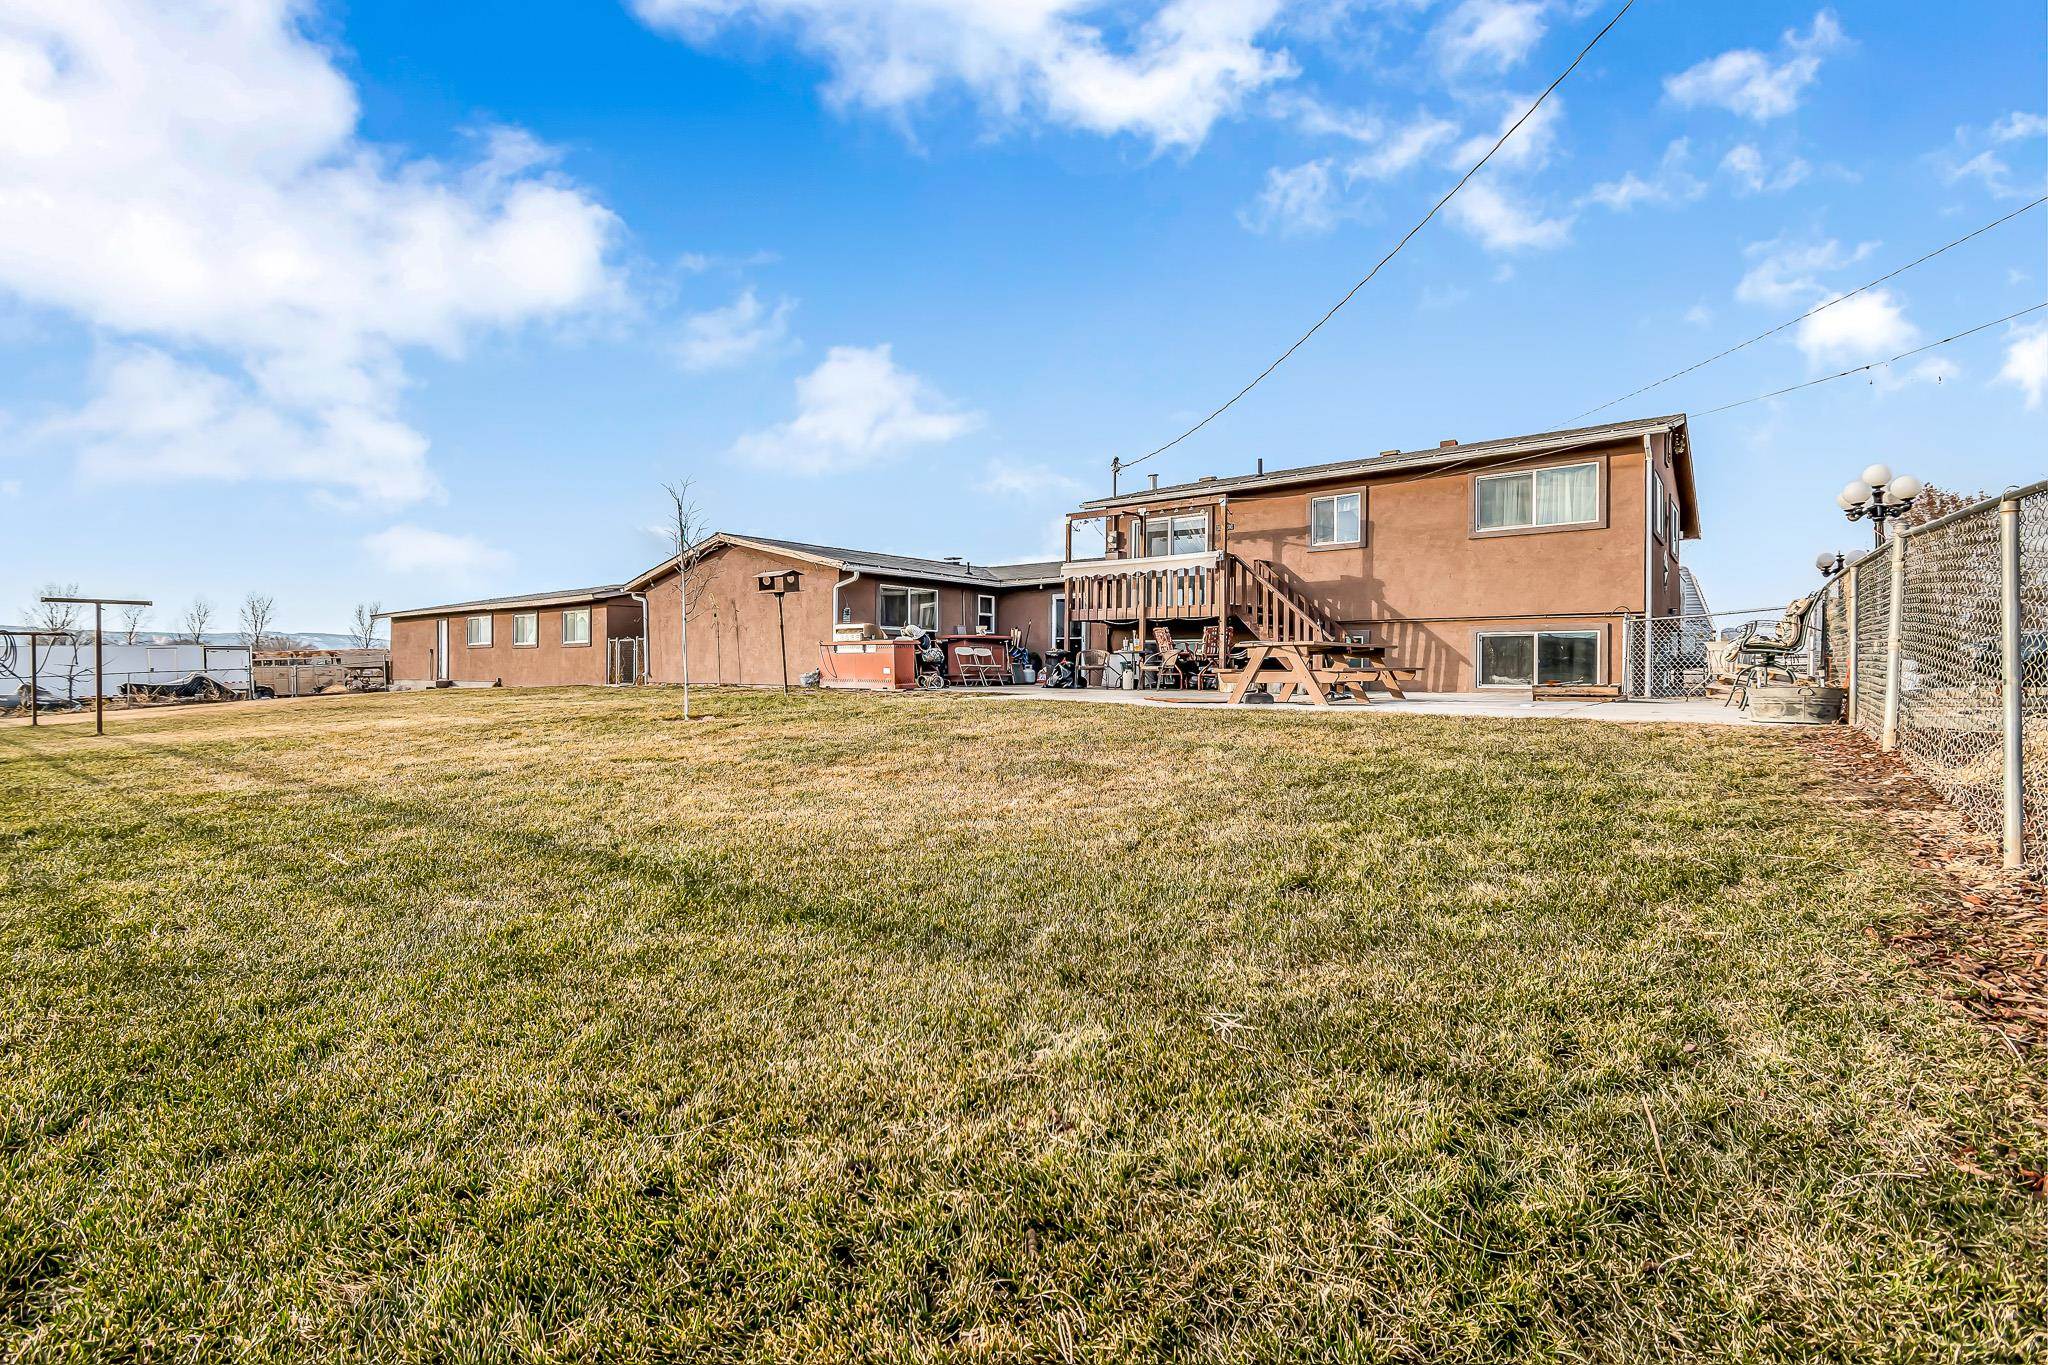 129 30 3/4 Road, Grand Junction, CO 81503